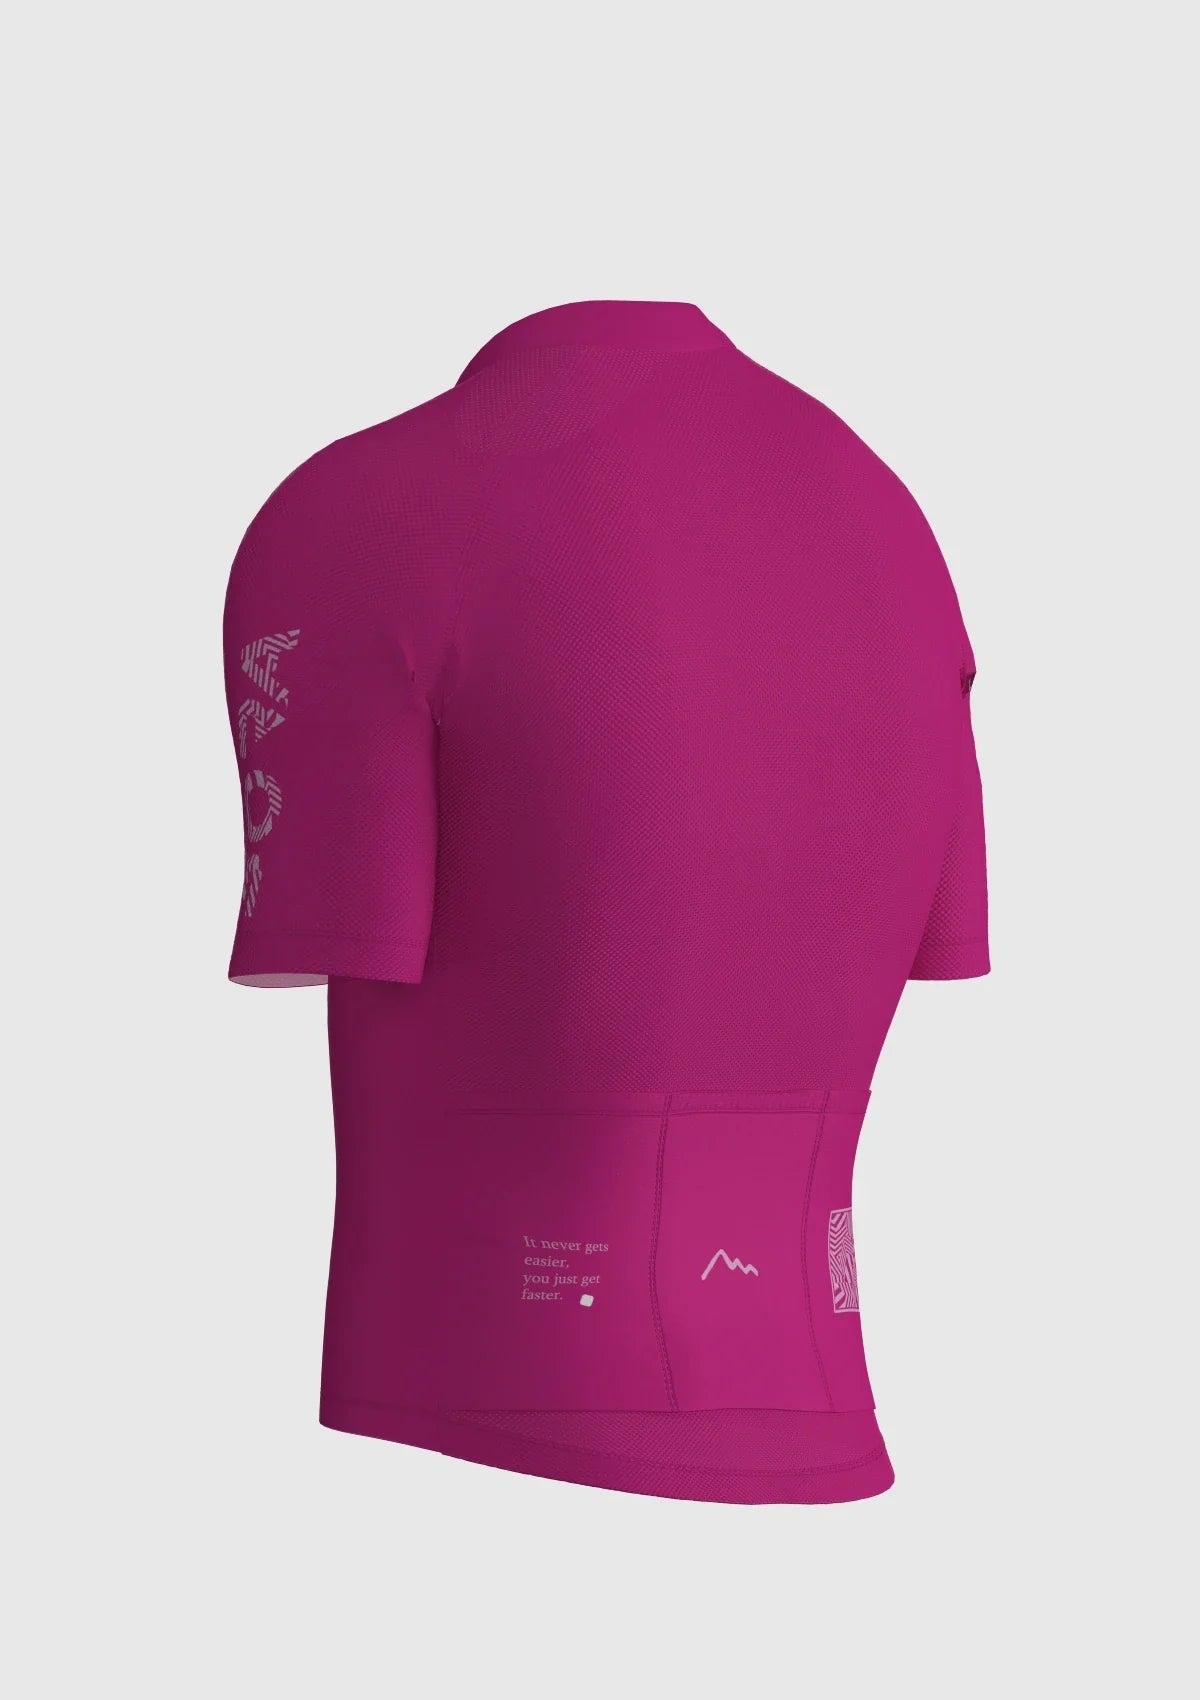 Classic Pink cycling jersey